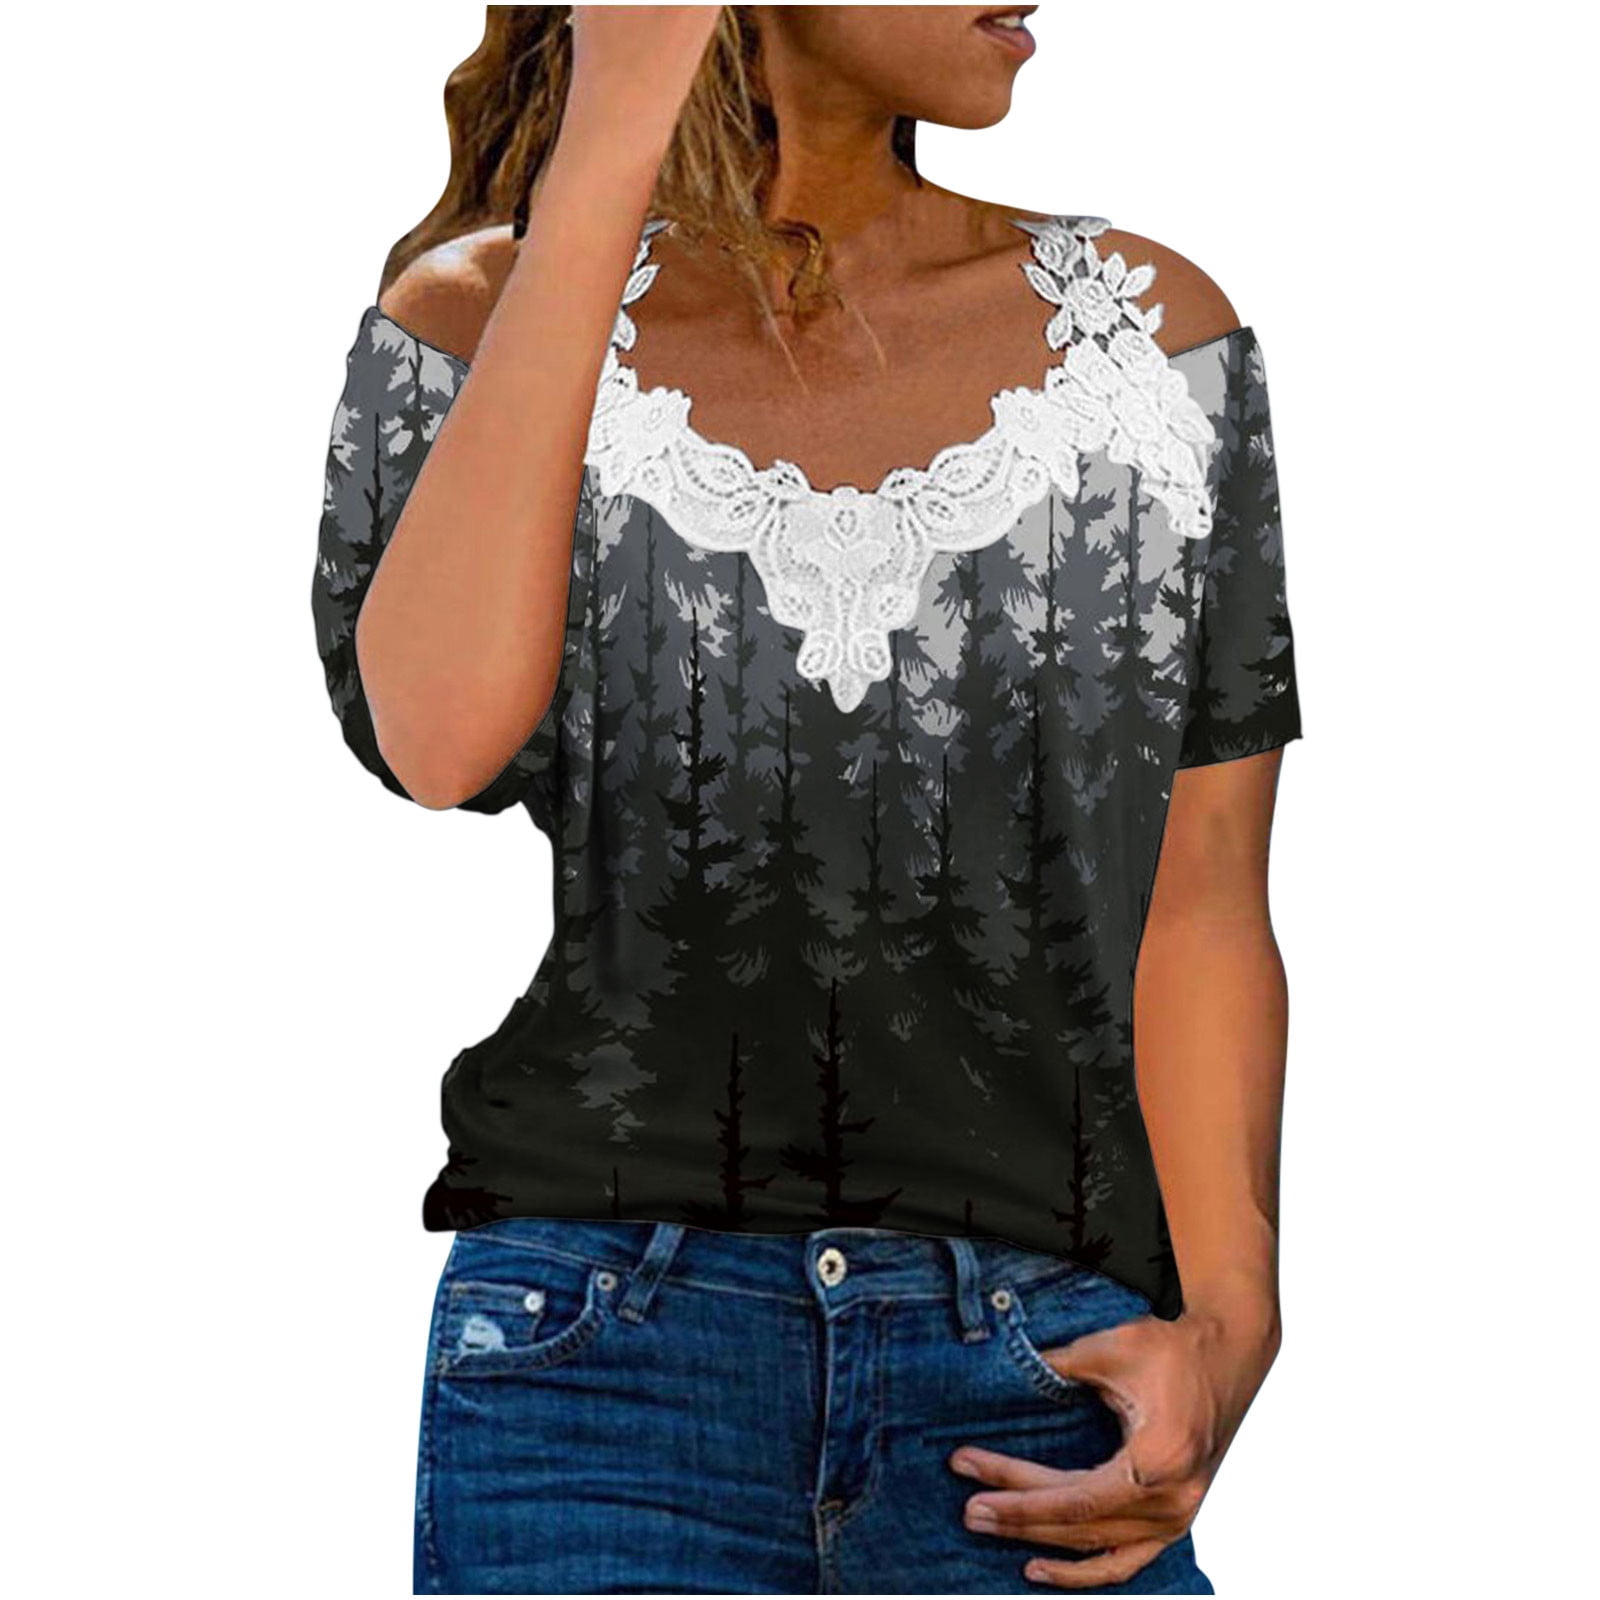 Dyegold Womens Blouses and Tops Dressy Cold Shoulder Lace Trim Tops for ...